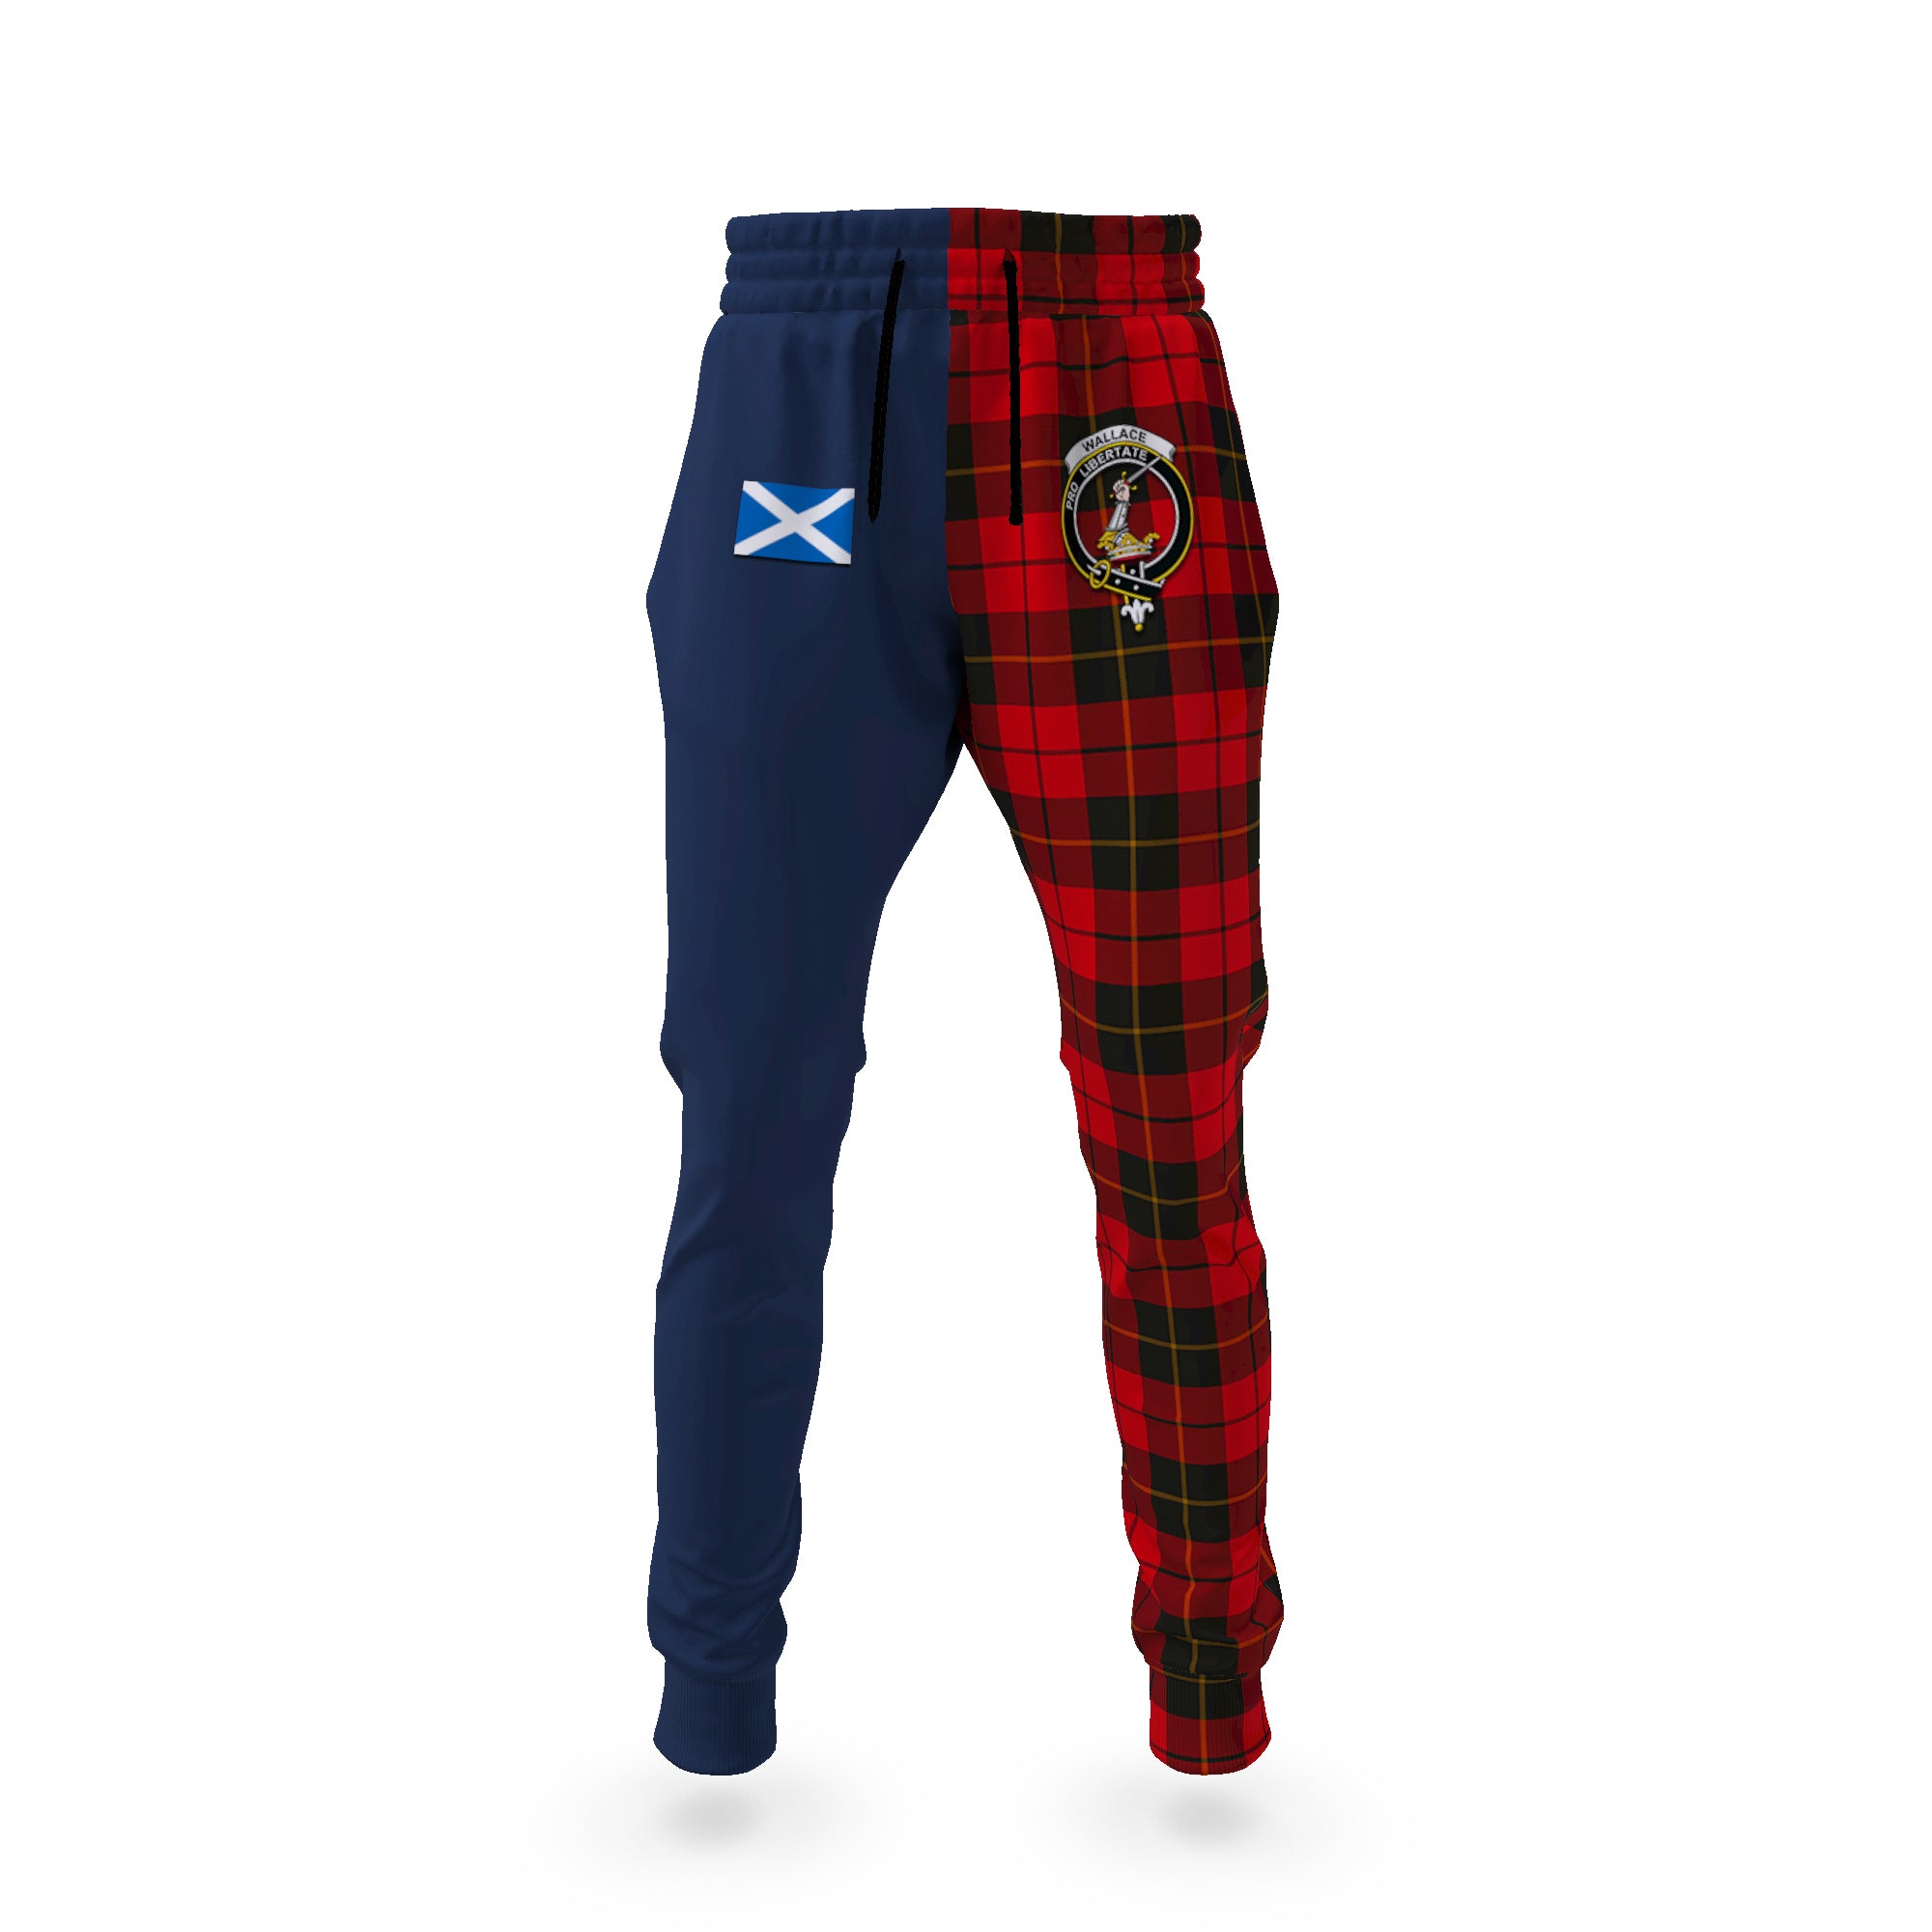 wallace-weathered-tartan-plaid-joggers-family-crest-tartan-joggers-with-scottish-flag-half-style